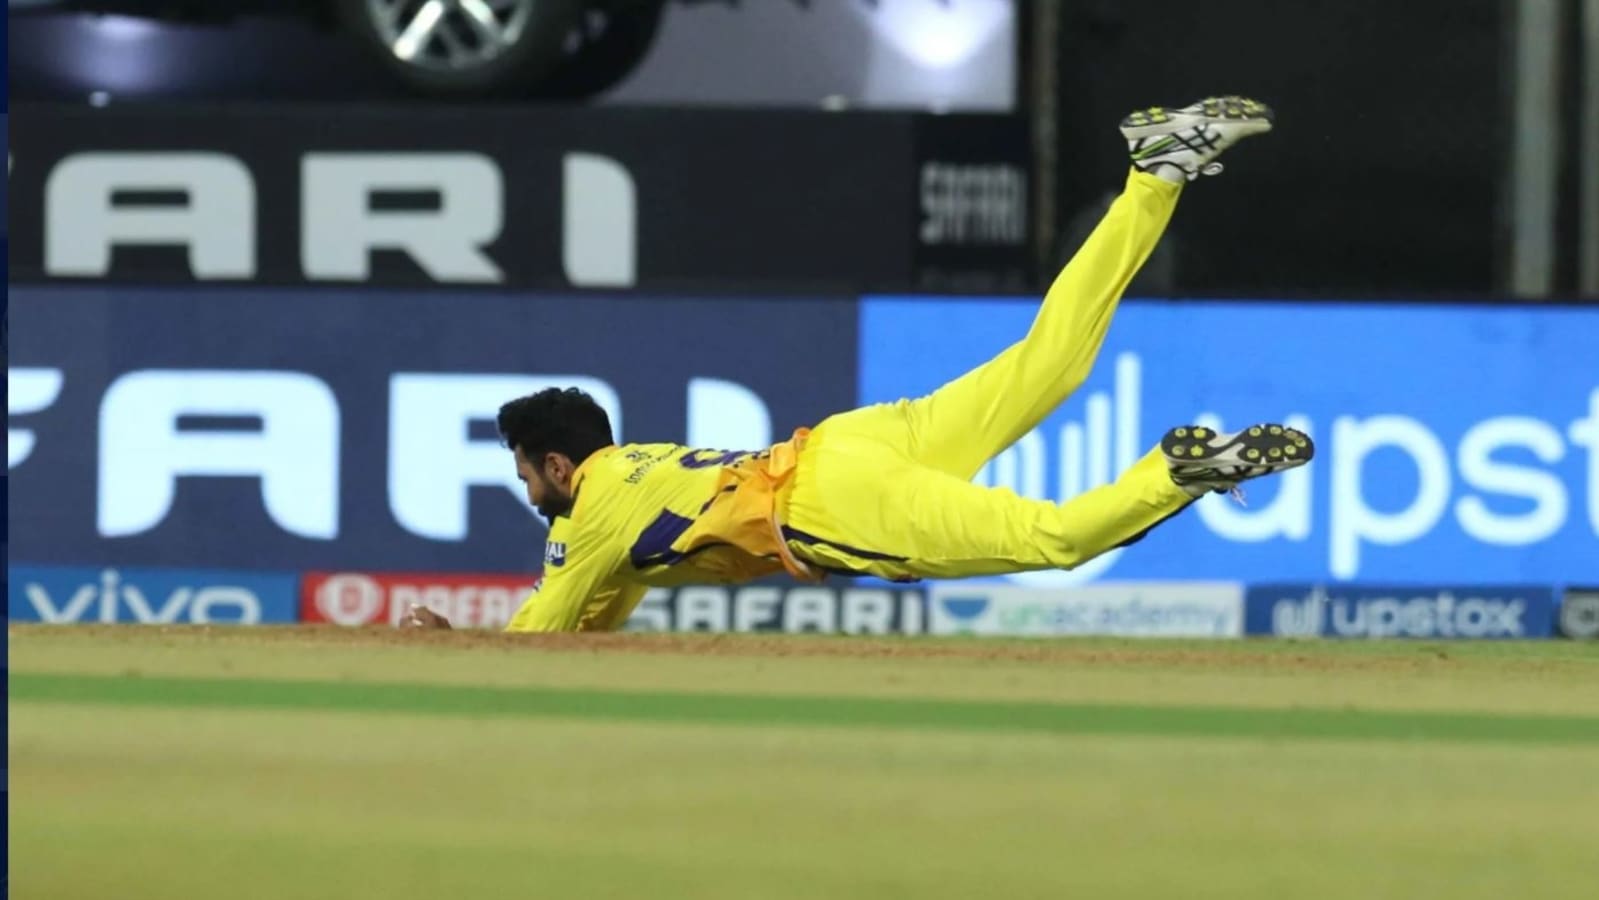 PBKS vs CSK, IPL 2021: A direct-hit and a diving catch - Ravindra